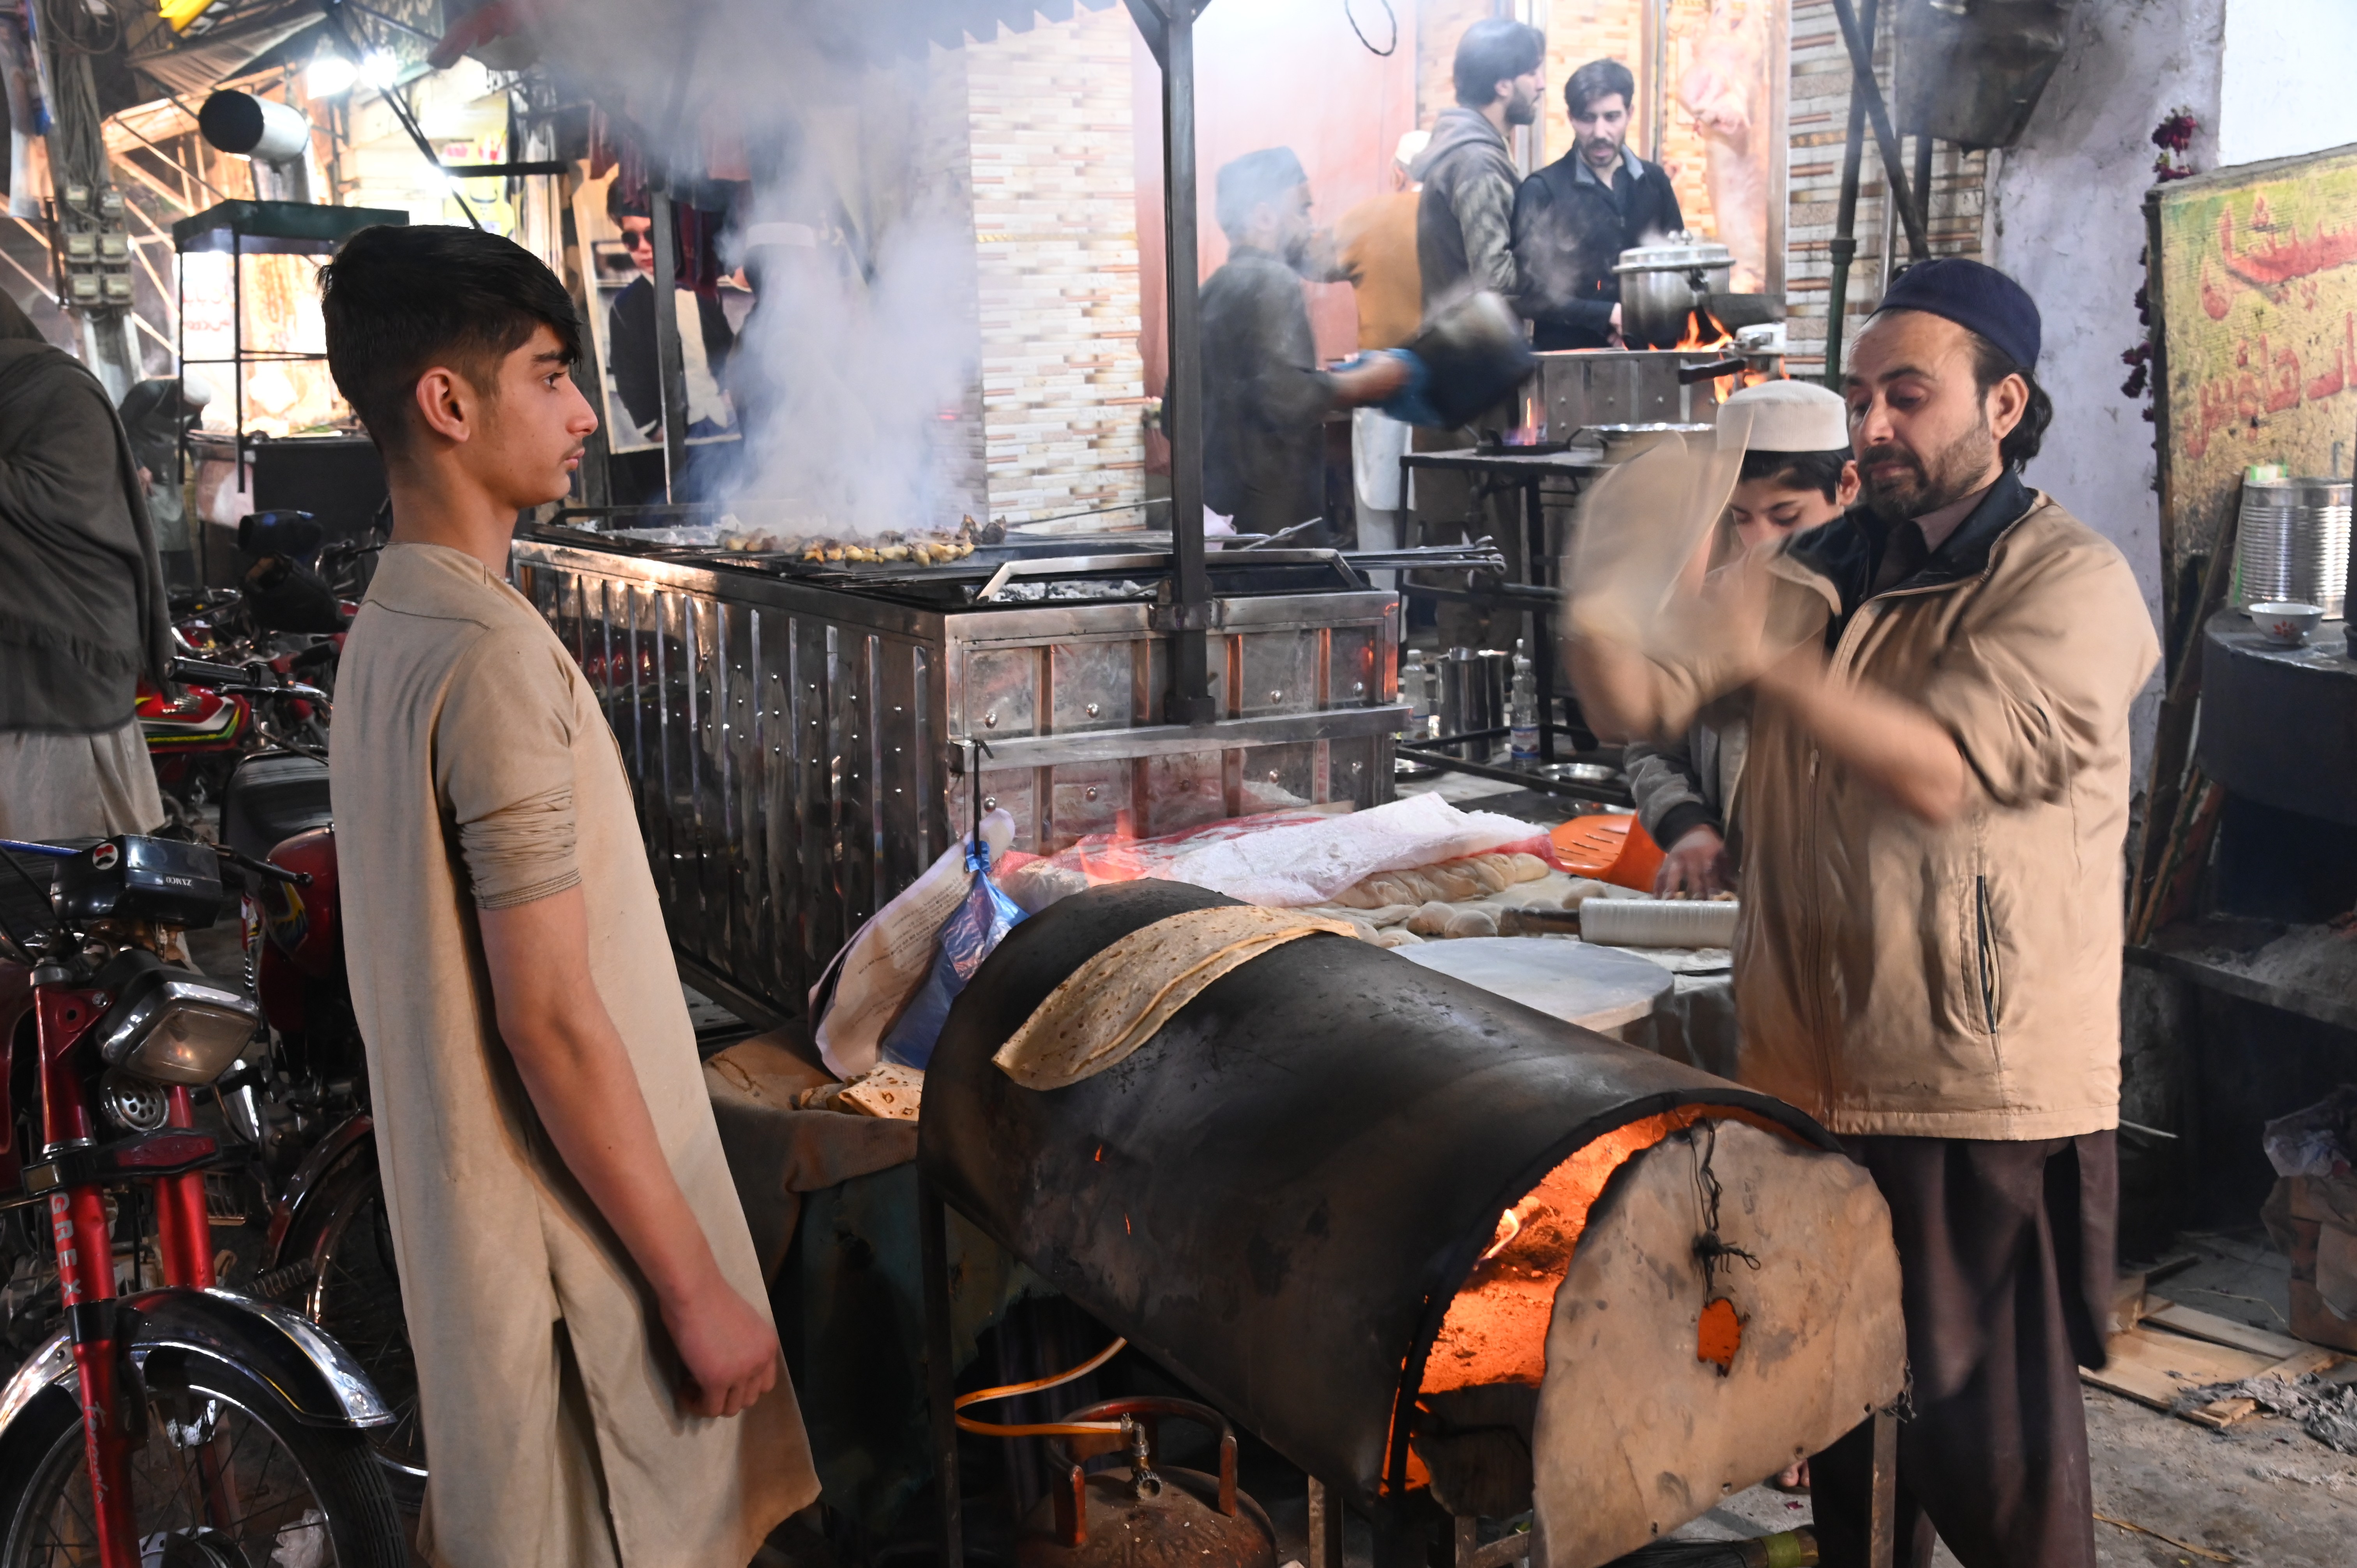 A man busy in making Afghani Naan